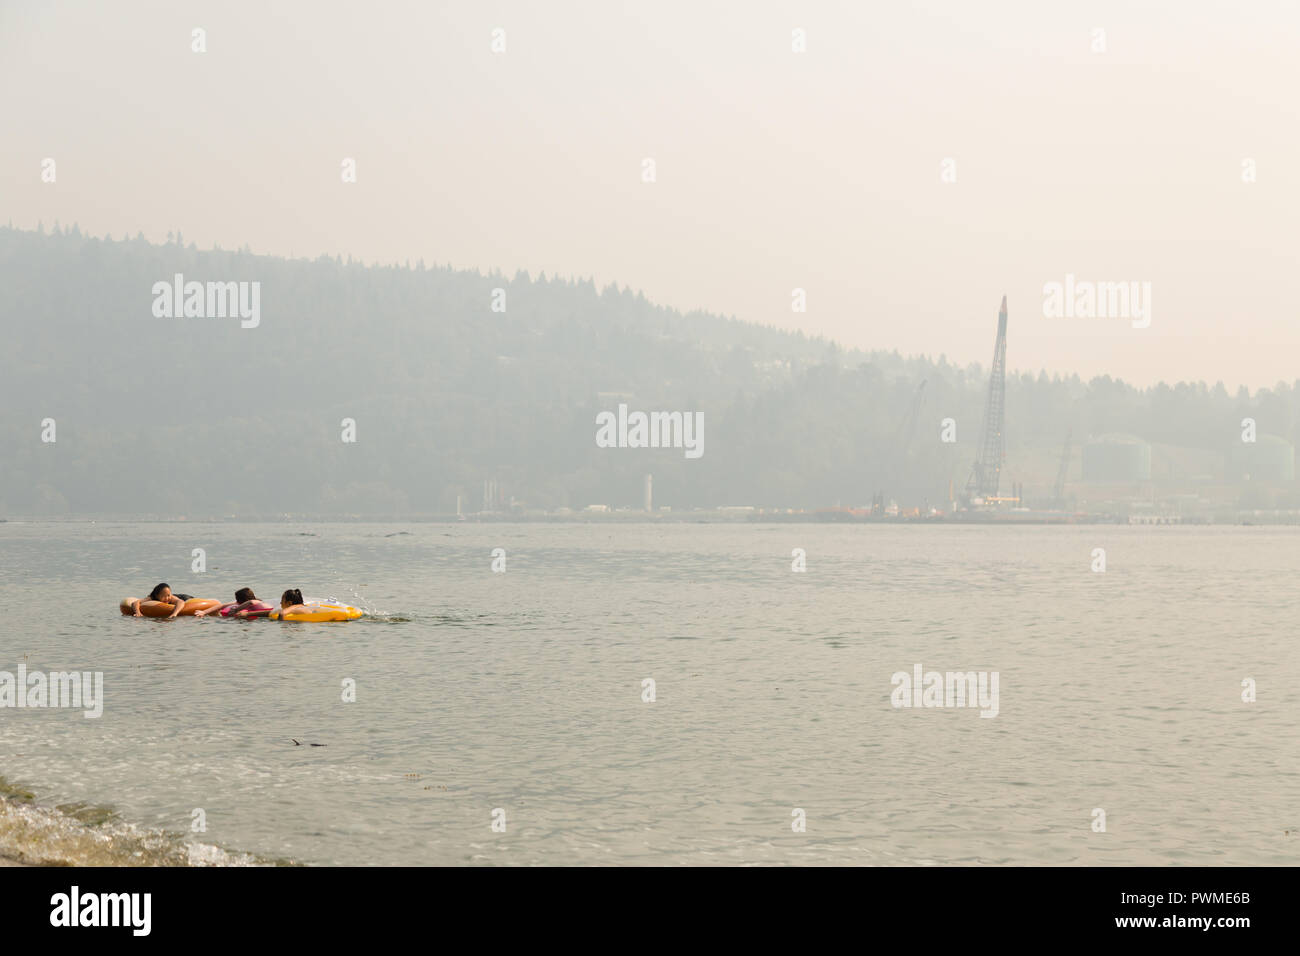 VANCOUVER, BC, CANADA - AUG 20, 2018: Children play in the ocean near a North Vancouver beach with the haze from forest fires obscurring the view. Stock Photo